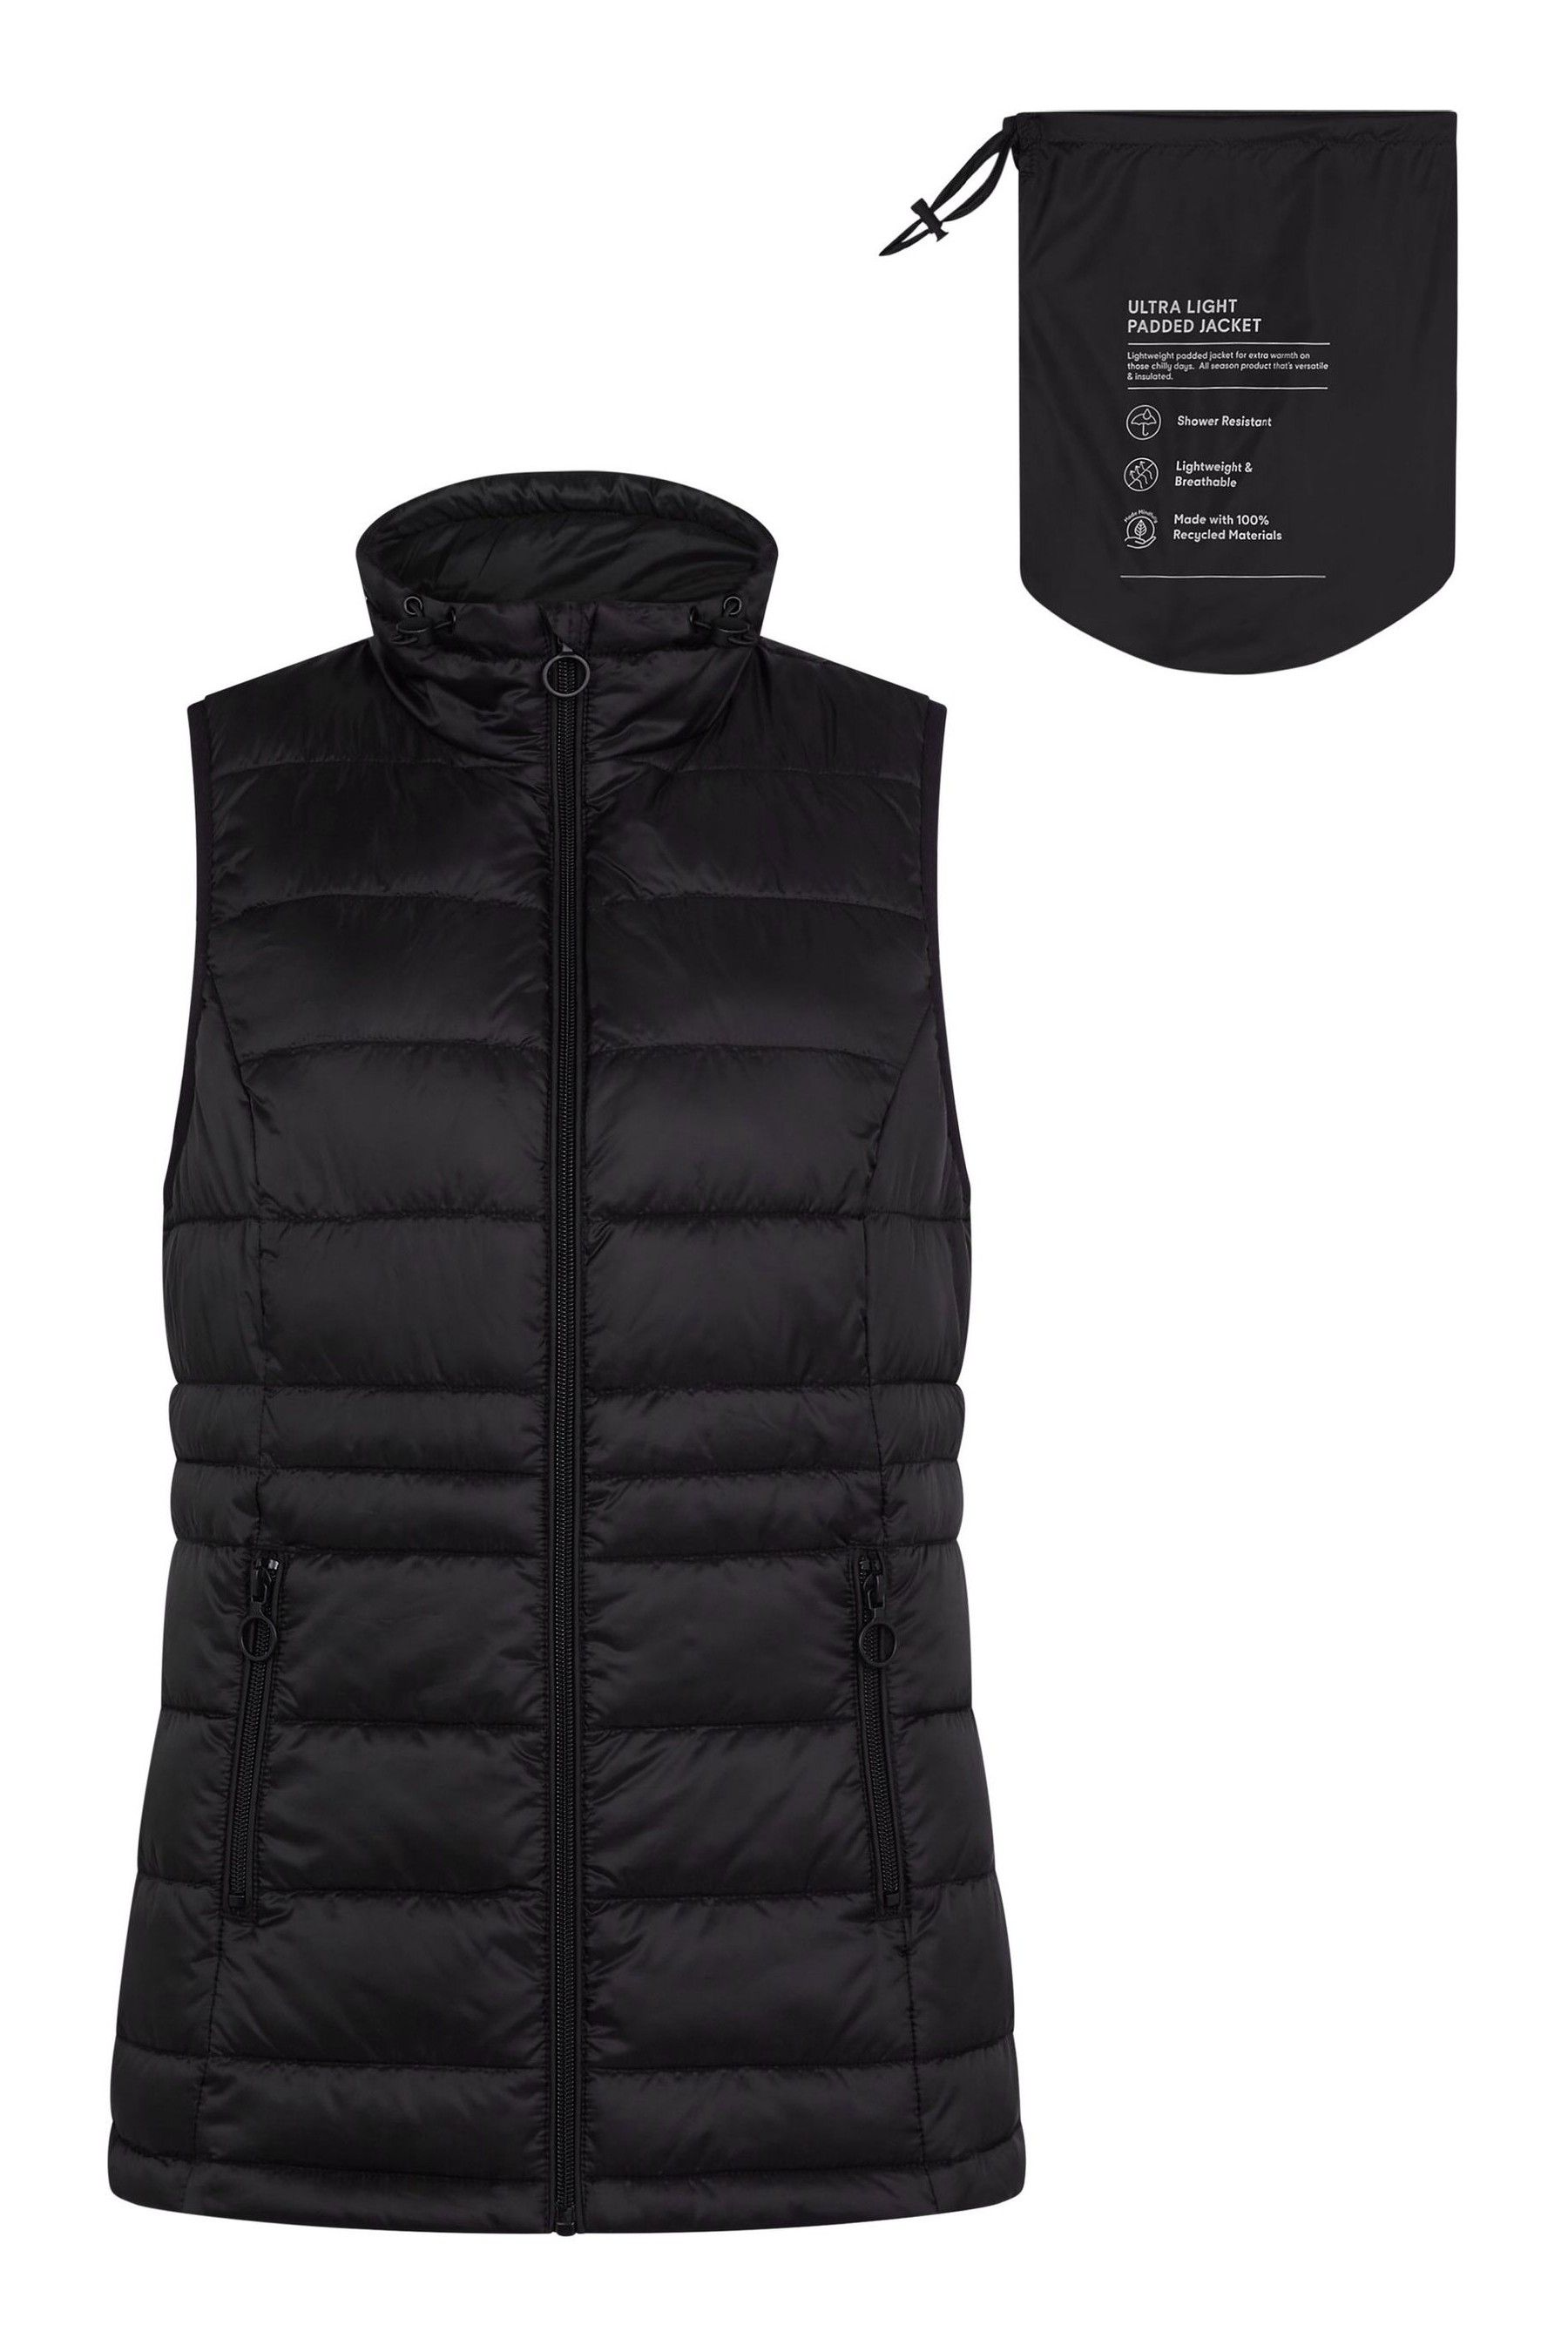 Buy F&F Black Gilet from the Next UK online shop